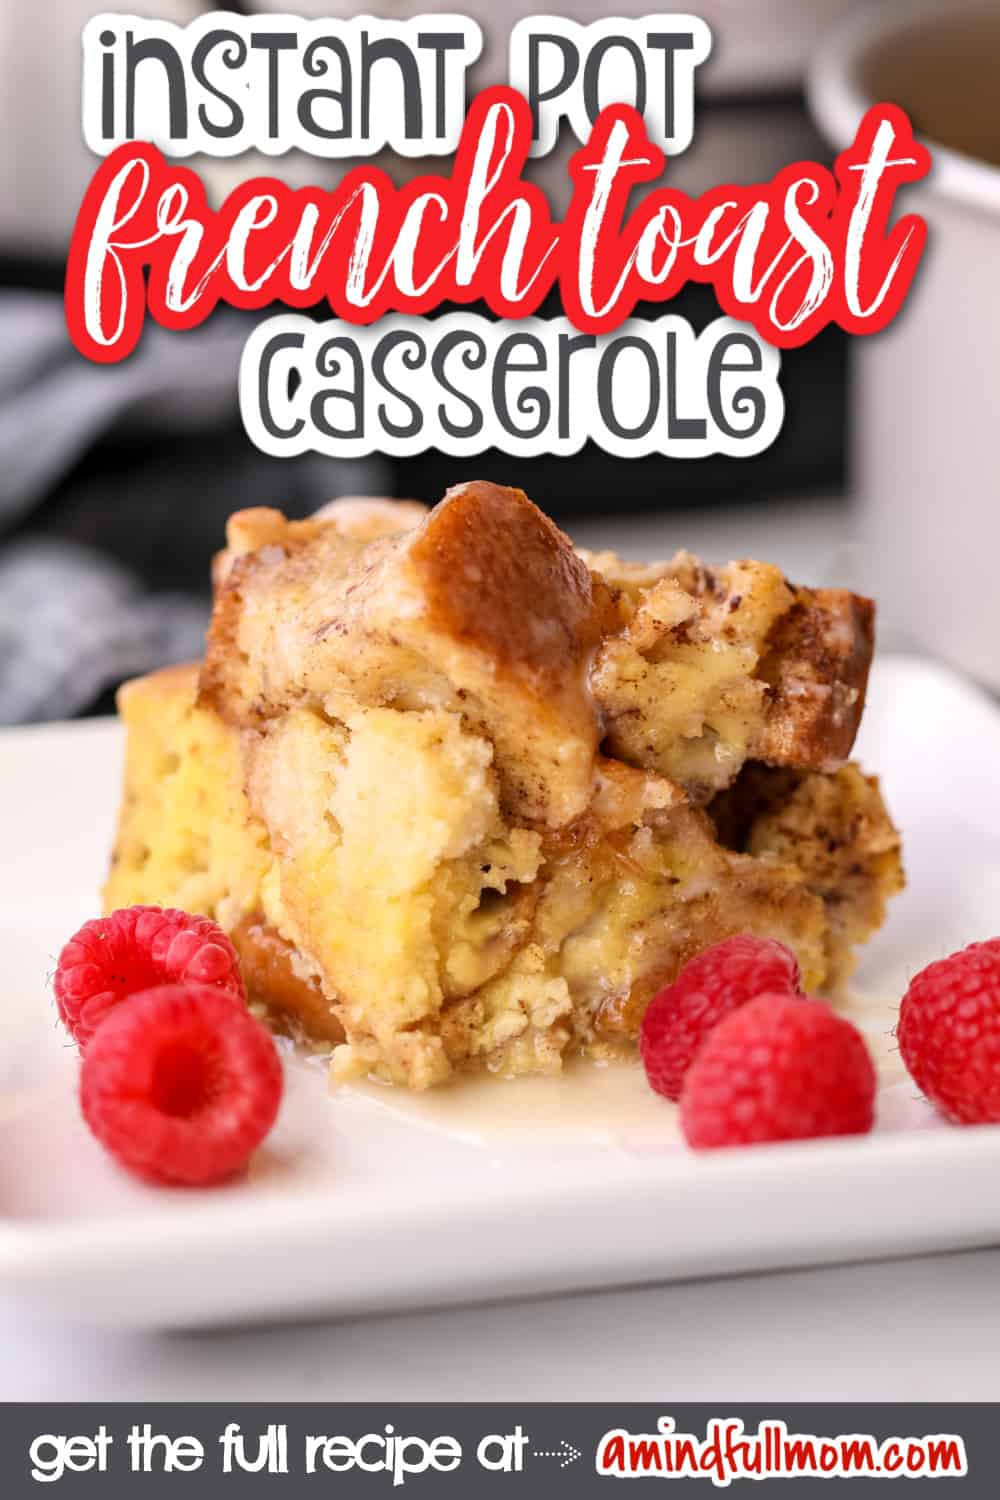 Instant Pot French Toast Casserole is an easy, make-ahead recipe that makes breakfast a bit more special without making it complicated. Perfectly spiced, and moist, this French Toast Bake made in the Instant Pot, makes a perfect holiday breakfast or lazy weekend brunch.